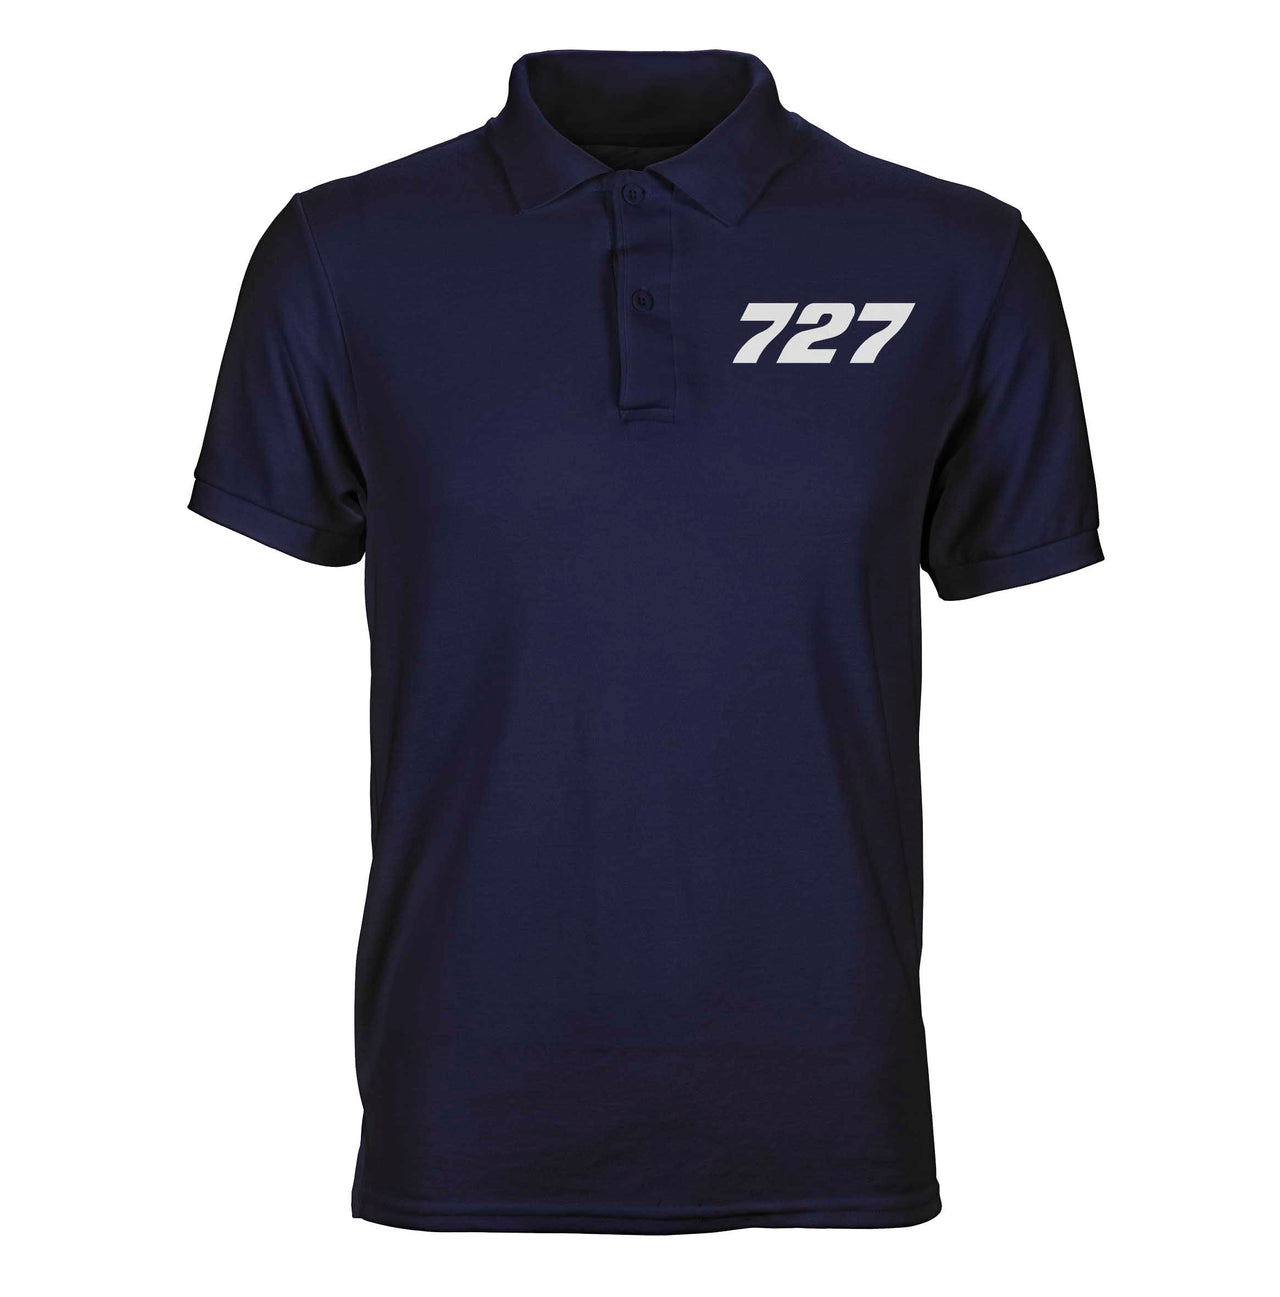 Boeing 727 Flat Text Designed Polo T-Shirts